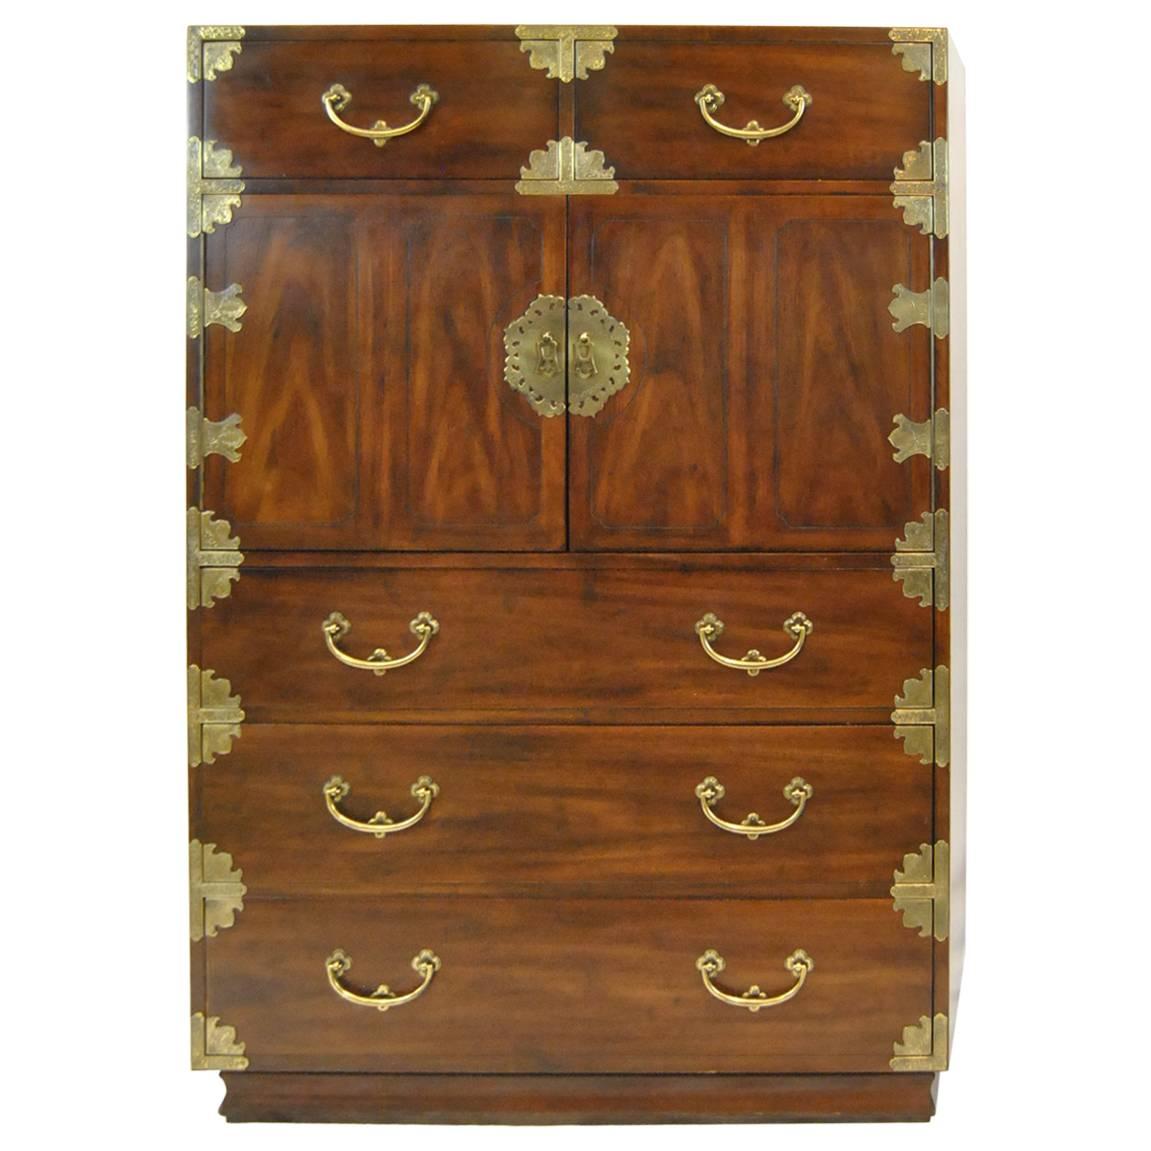 Tall Mahogany Gentlemen's Chest with Asian Campaign Styling by Henredon